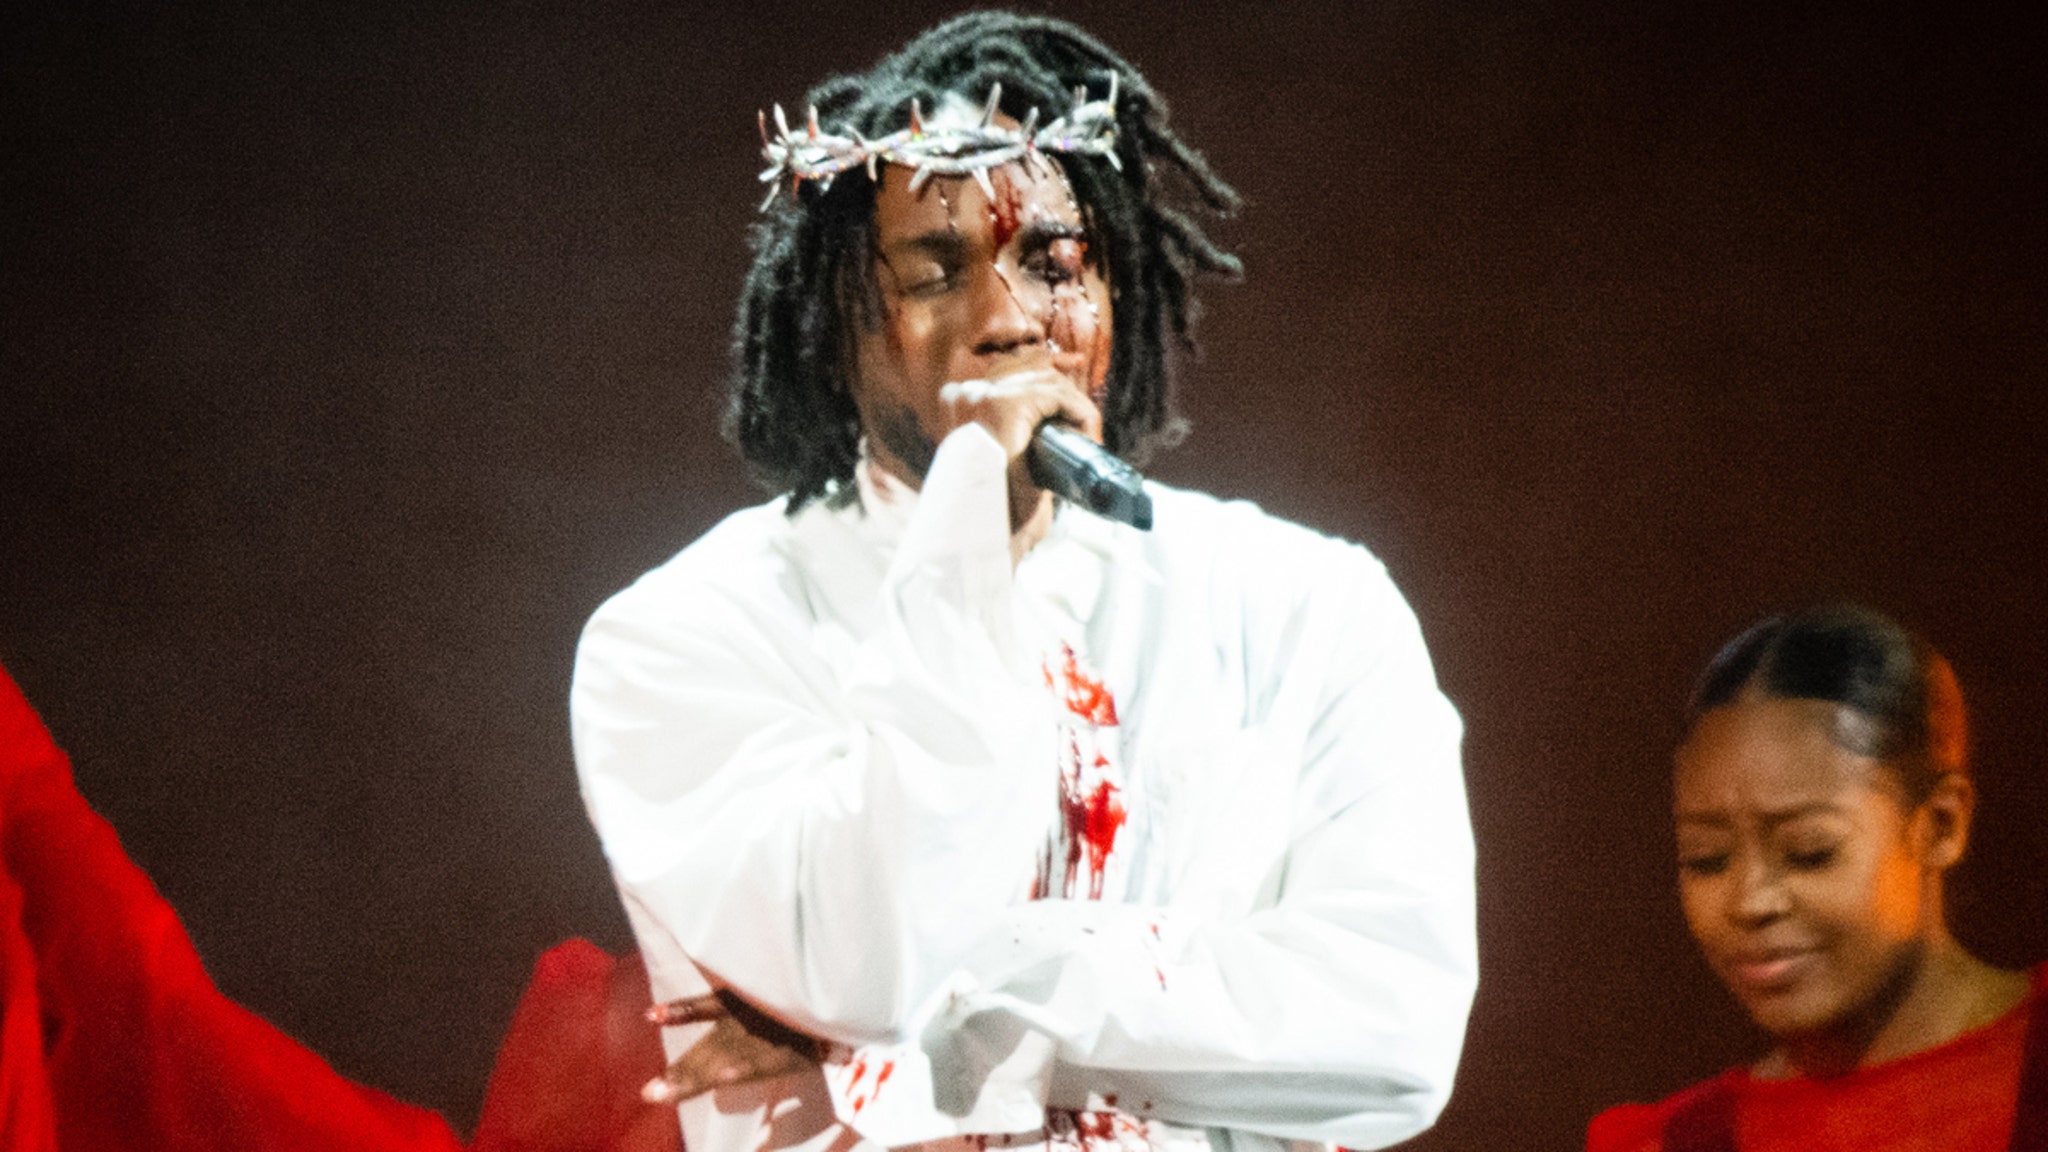 Kendrick Lamar's £165k crown of thorns – everything you need to